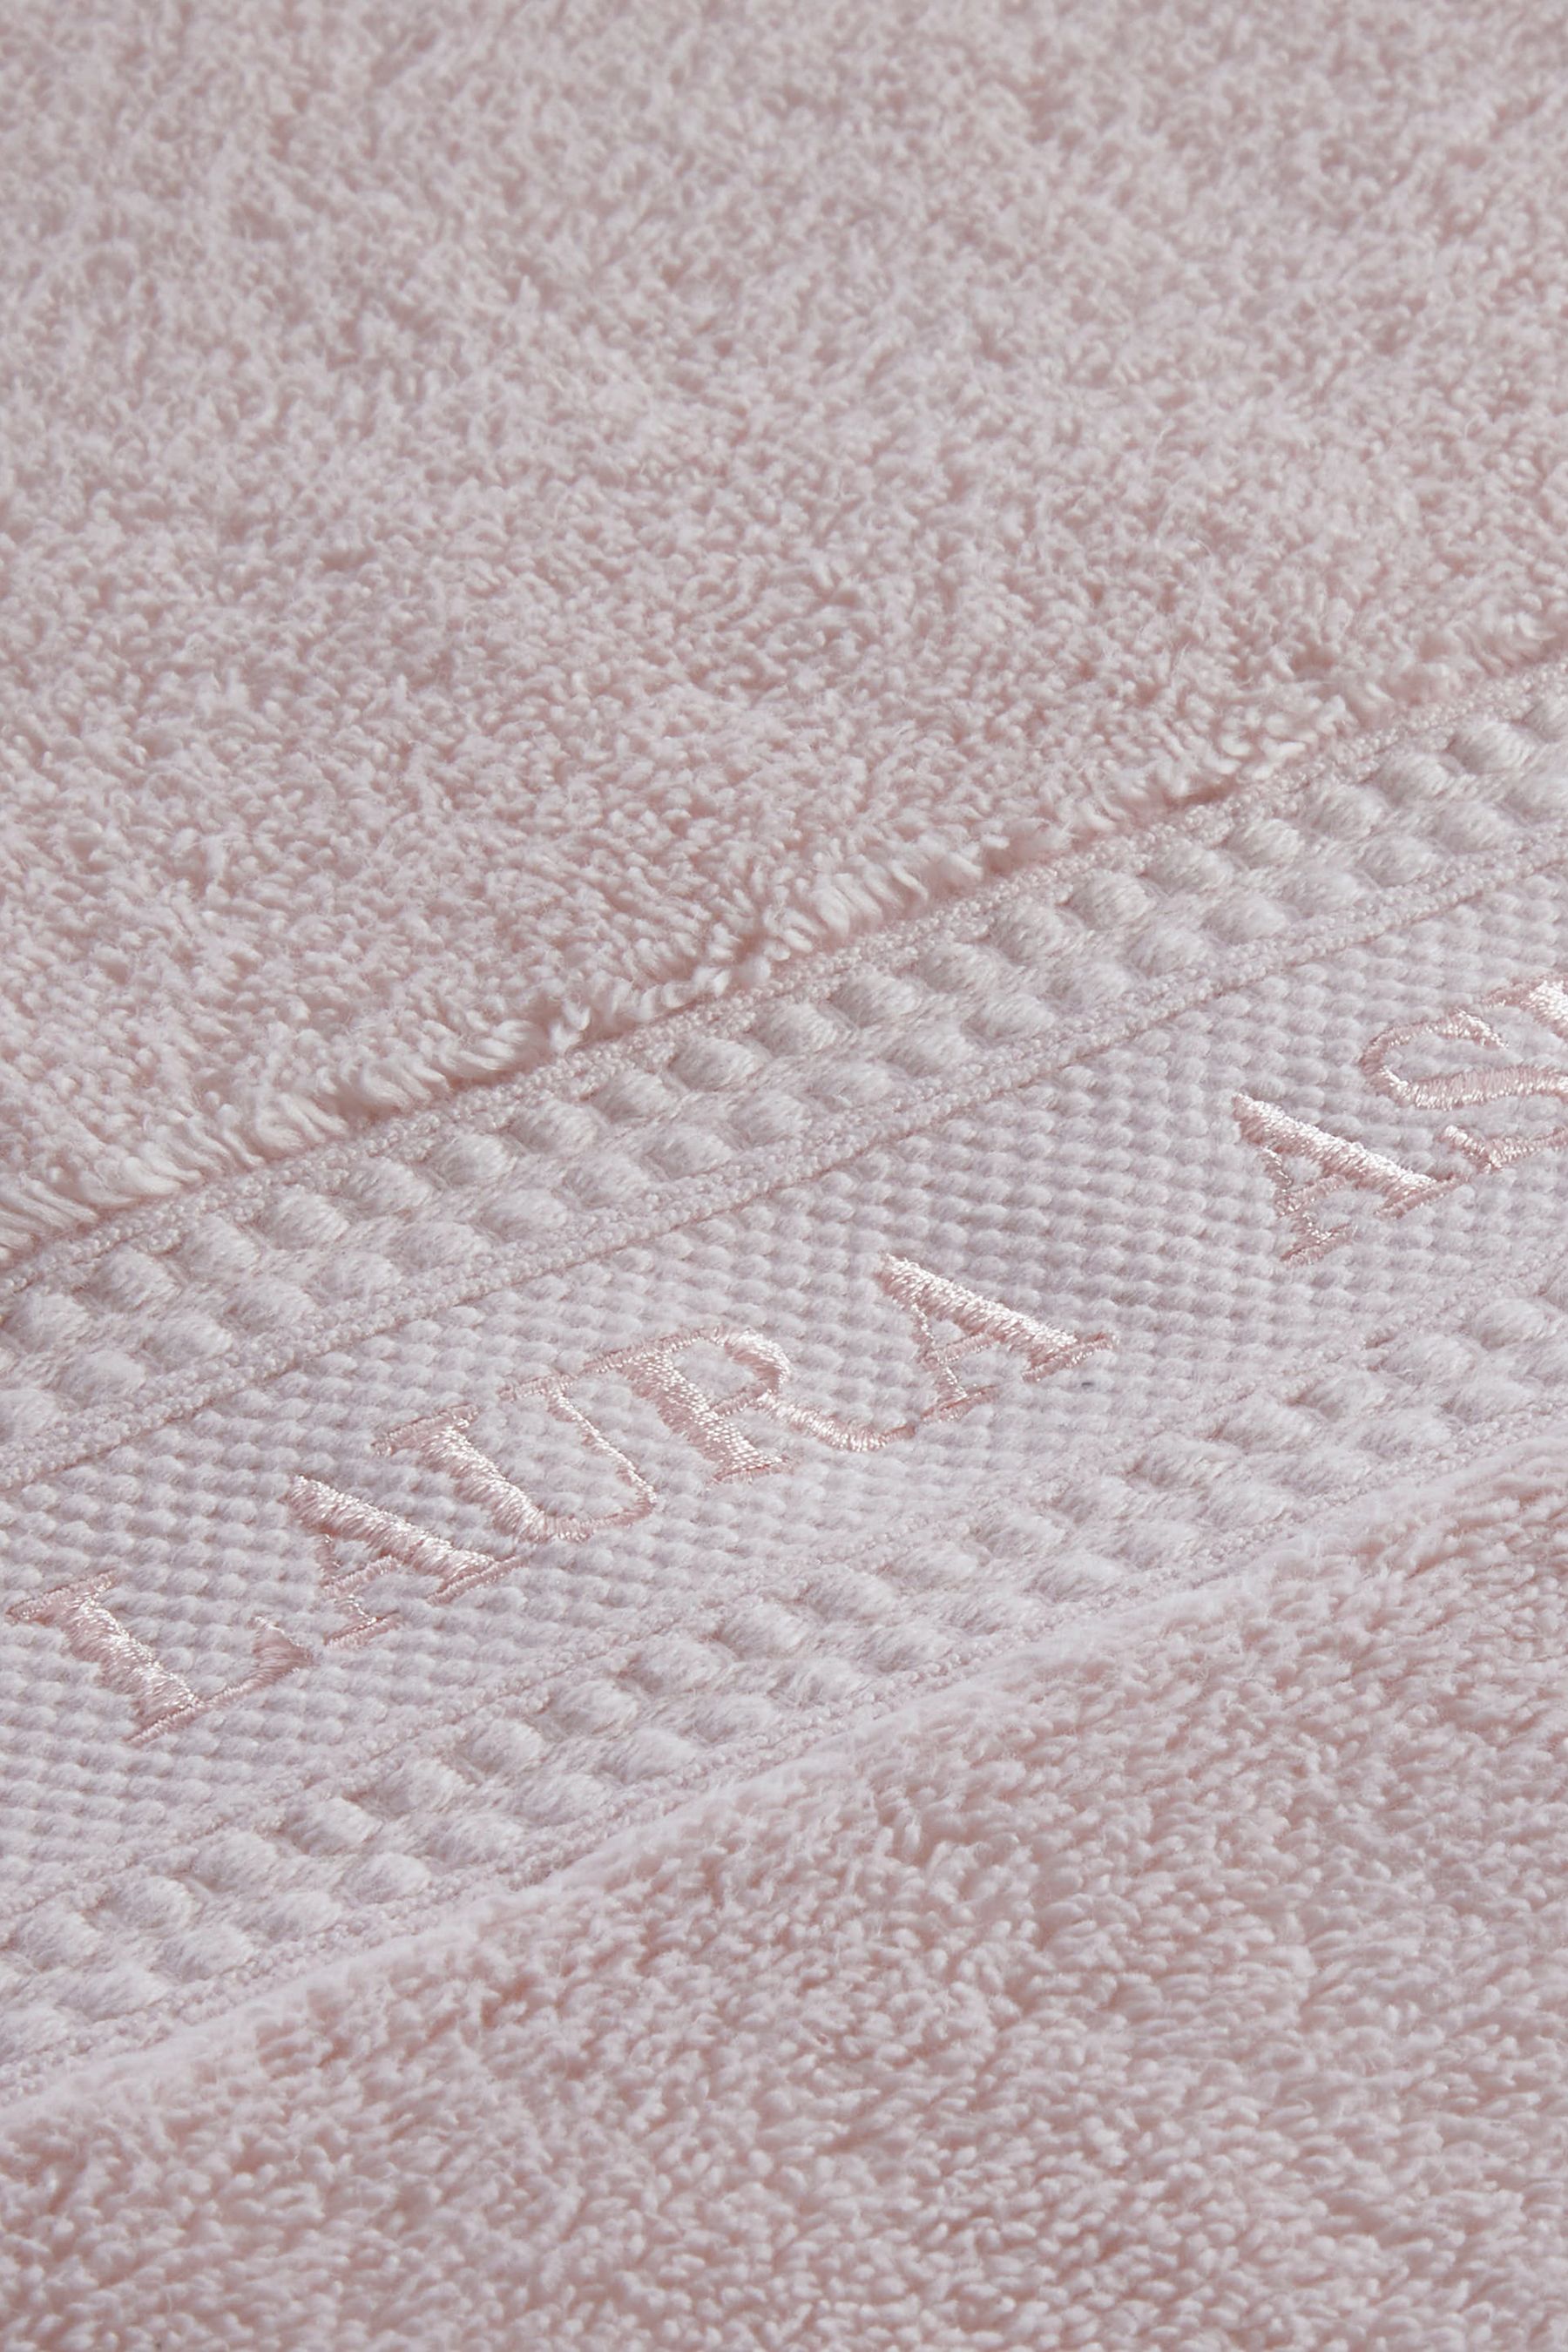 Buy Laura Ashley Blush Pink Luxury Cotton Embroidered Towel from the ...